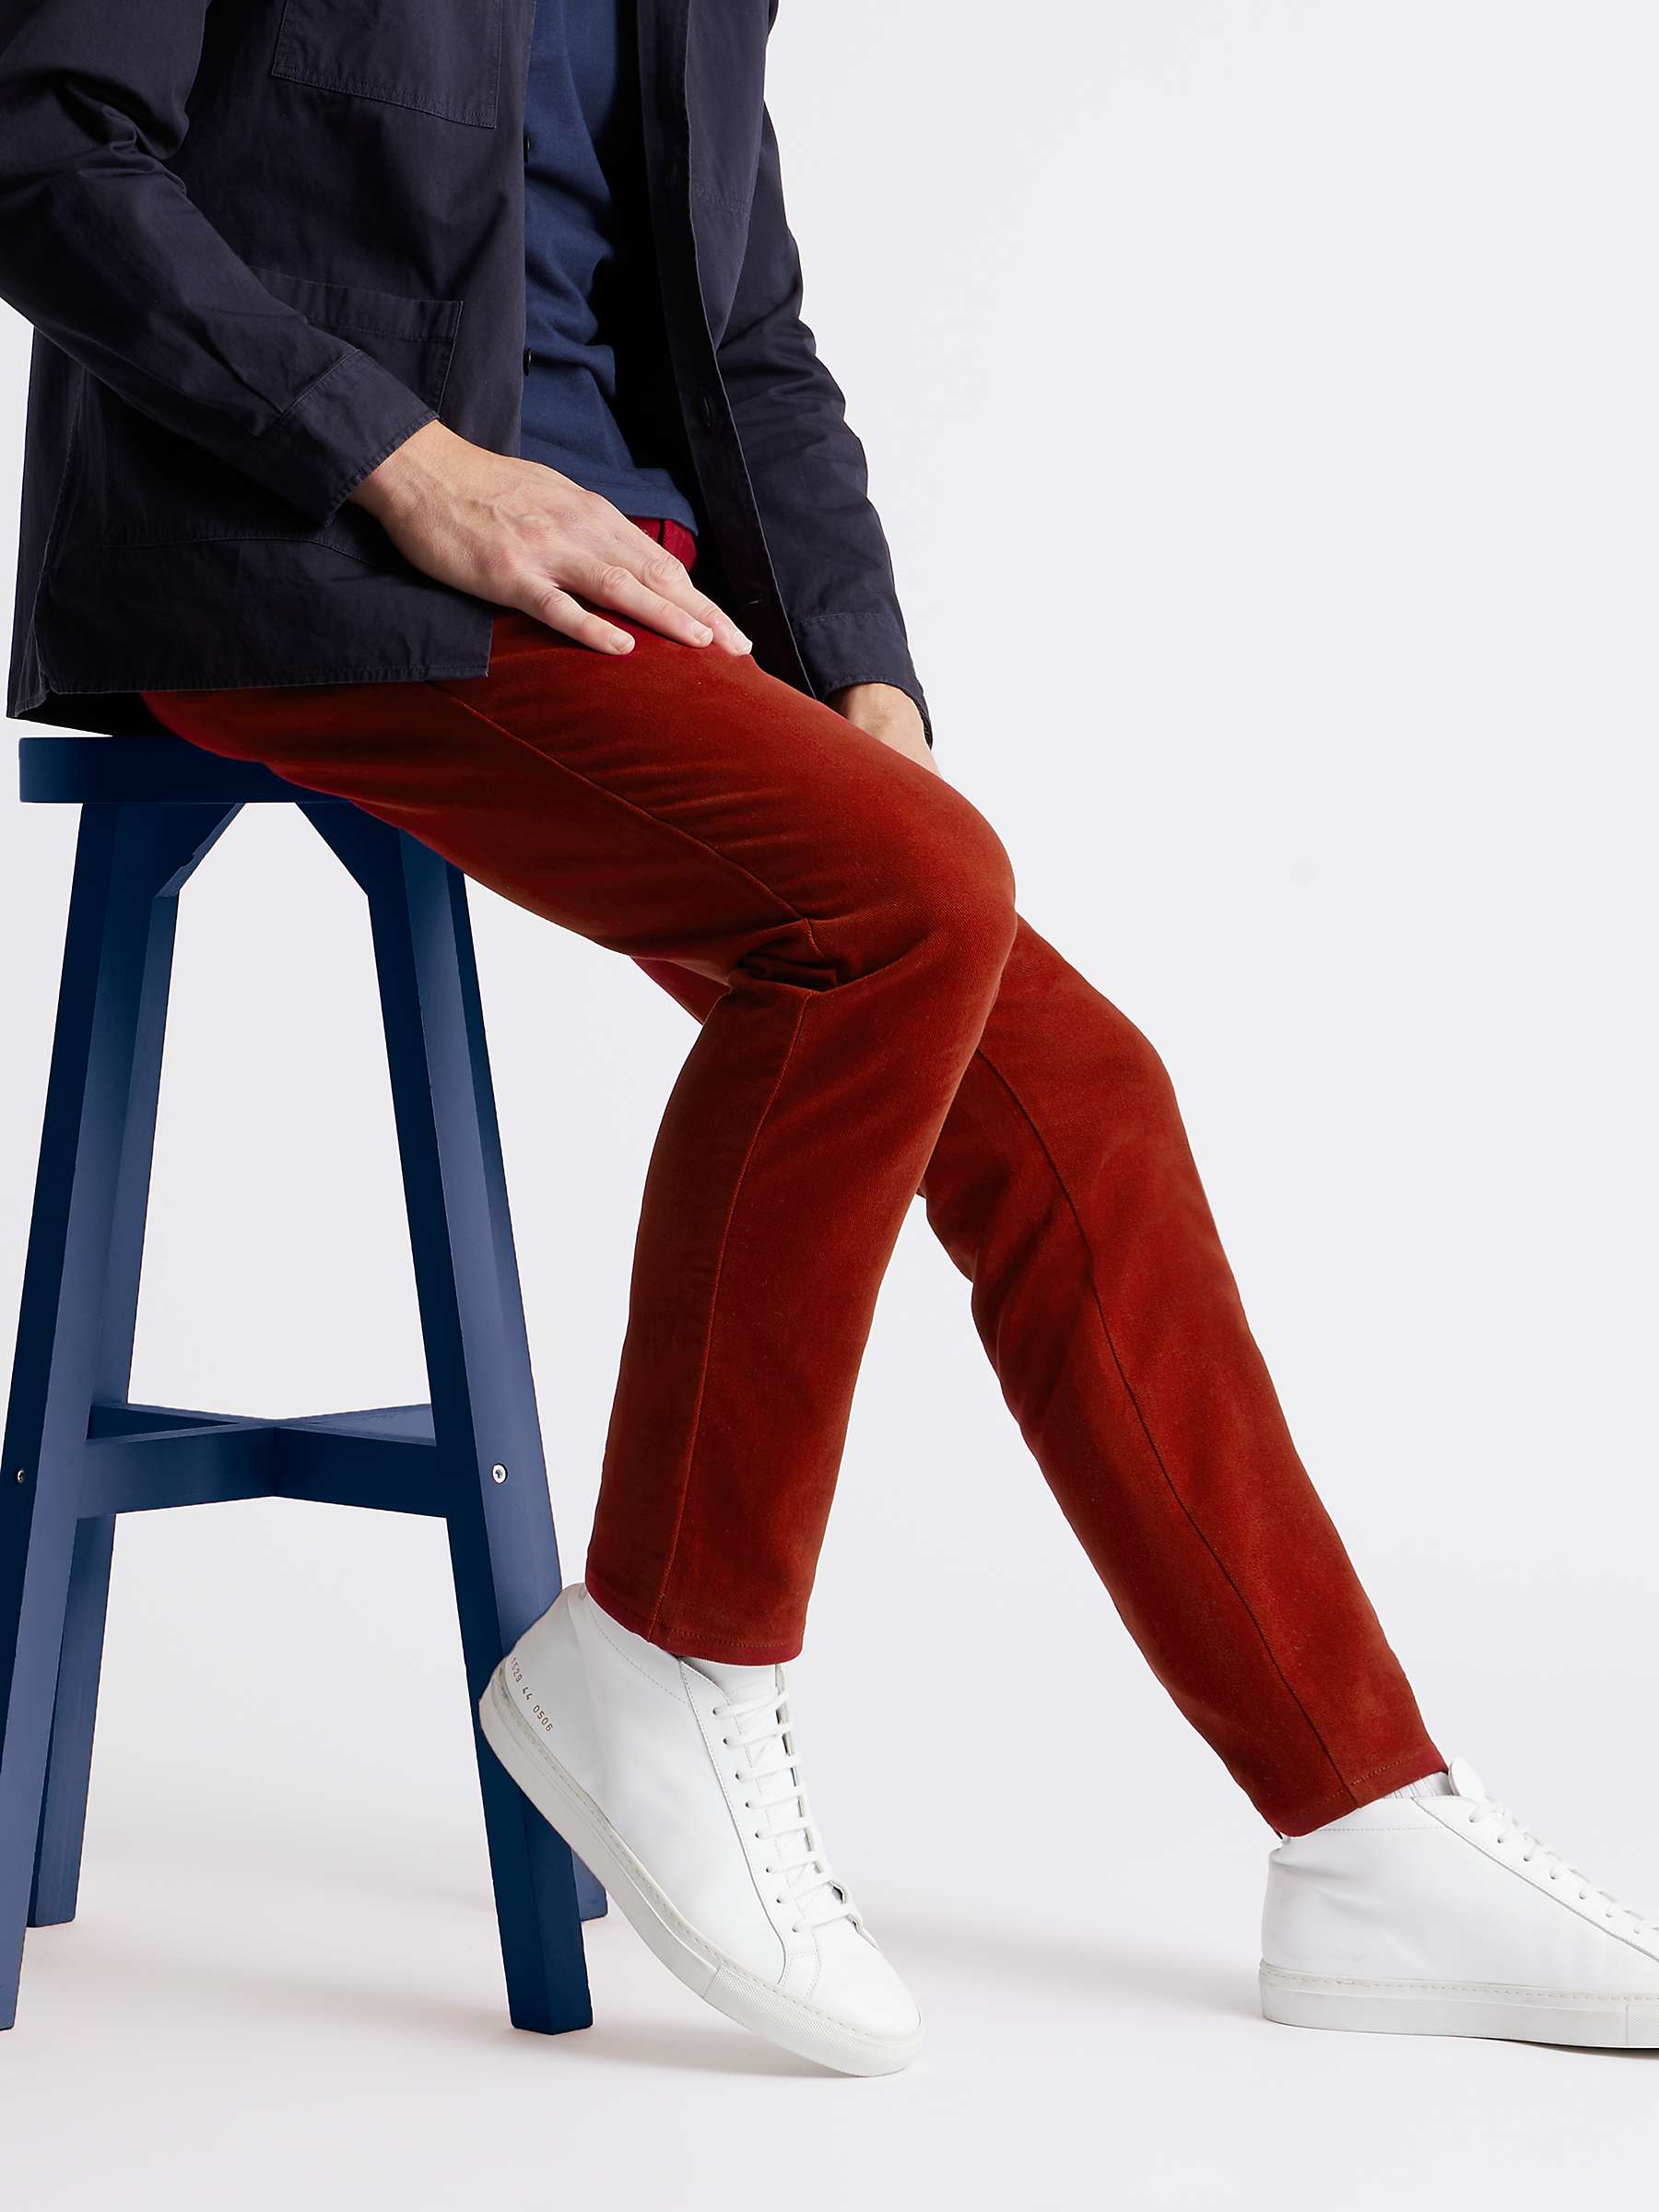 Buy SPOKE Winter Heroes Cotton Blend Narrow Thigh Chinos, Maroon Online at johnlewis.com